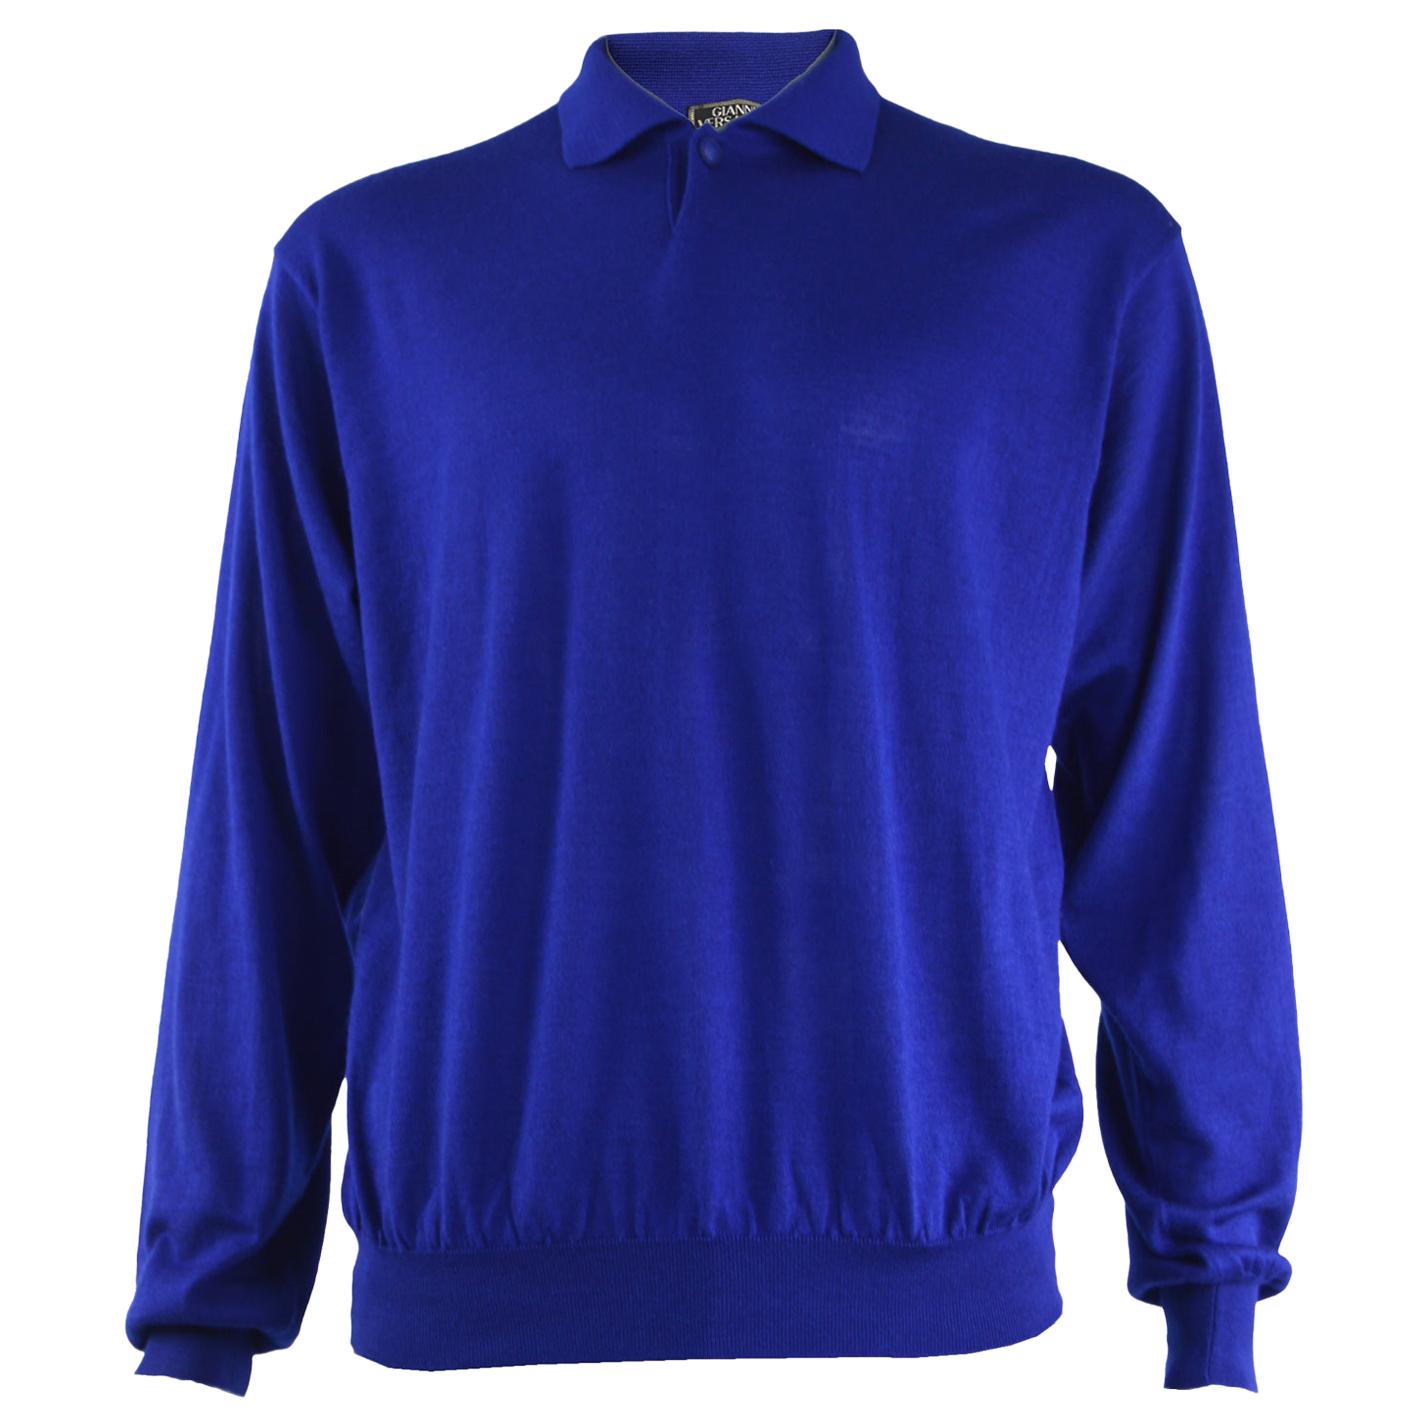 Gianni Versace Mens Cashmere & Silk Royal Blue Vintage Collared Sweater, 1990s  For Sale